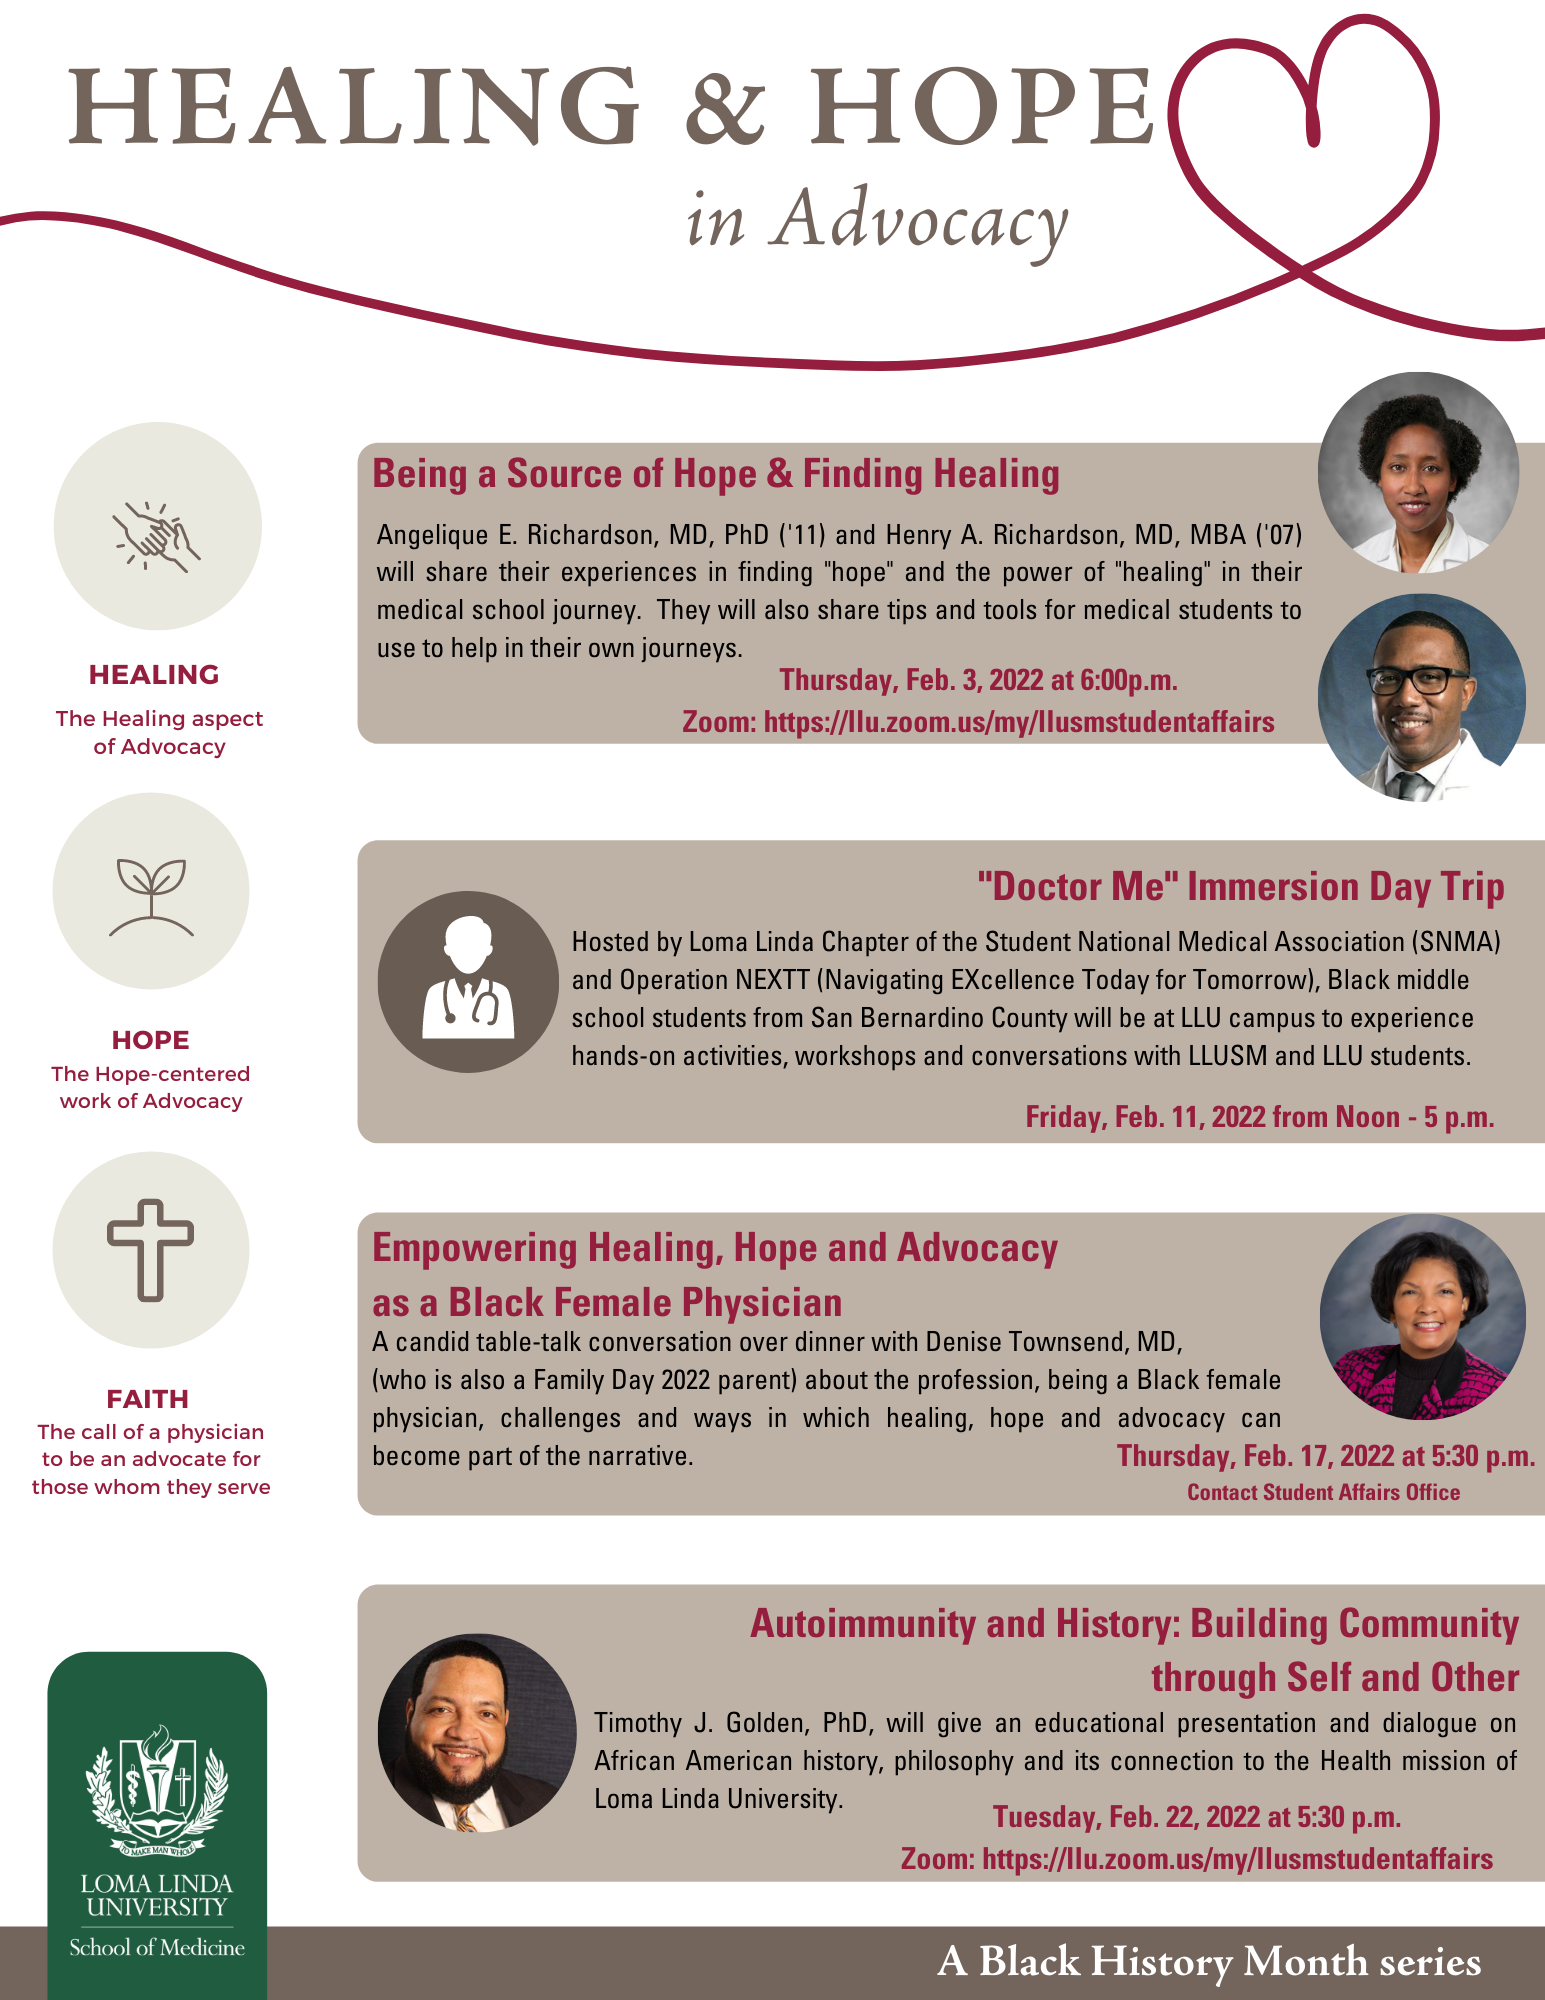 Black History Month Healing and Hope event